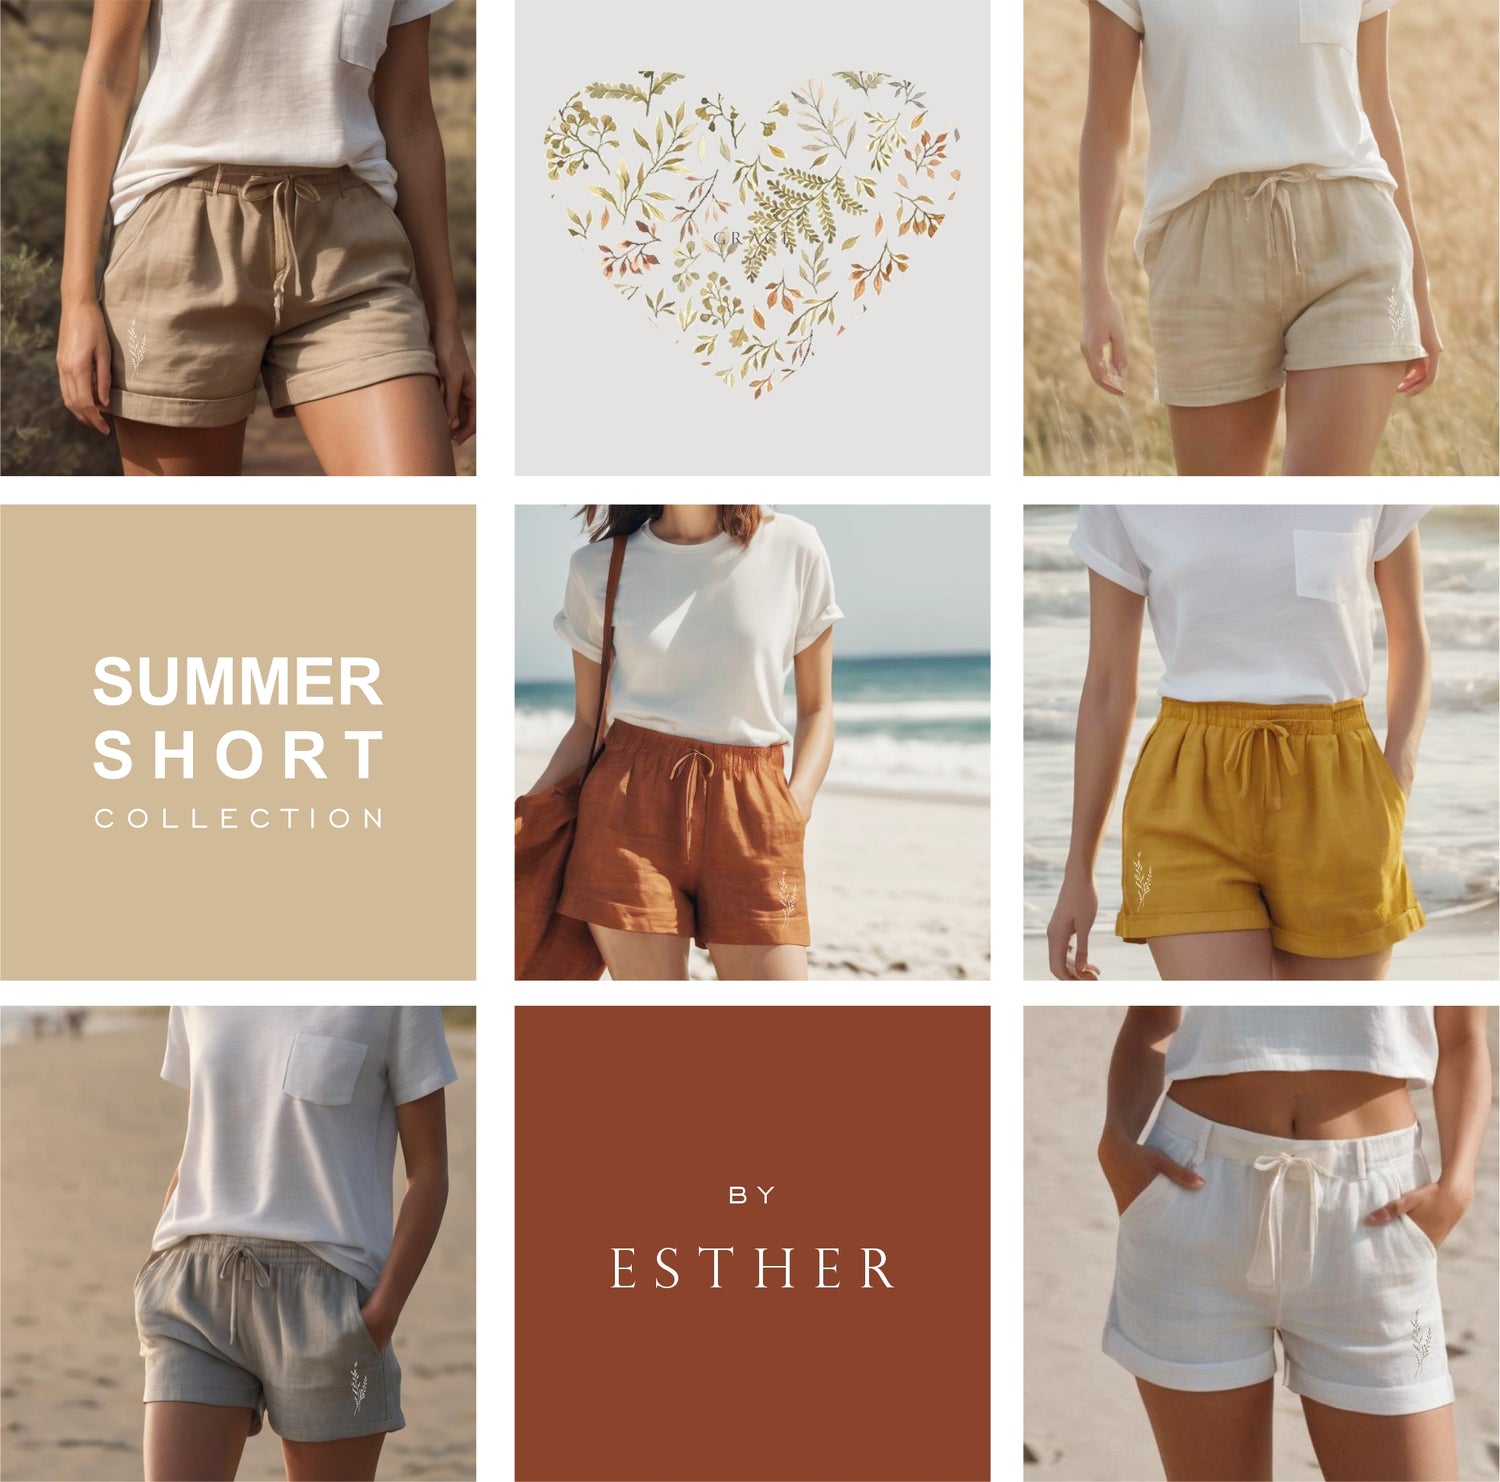 SUMMER SHORT COLLECTION